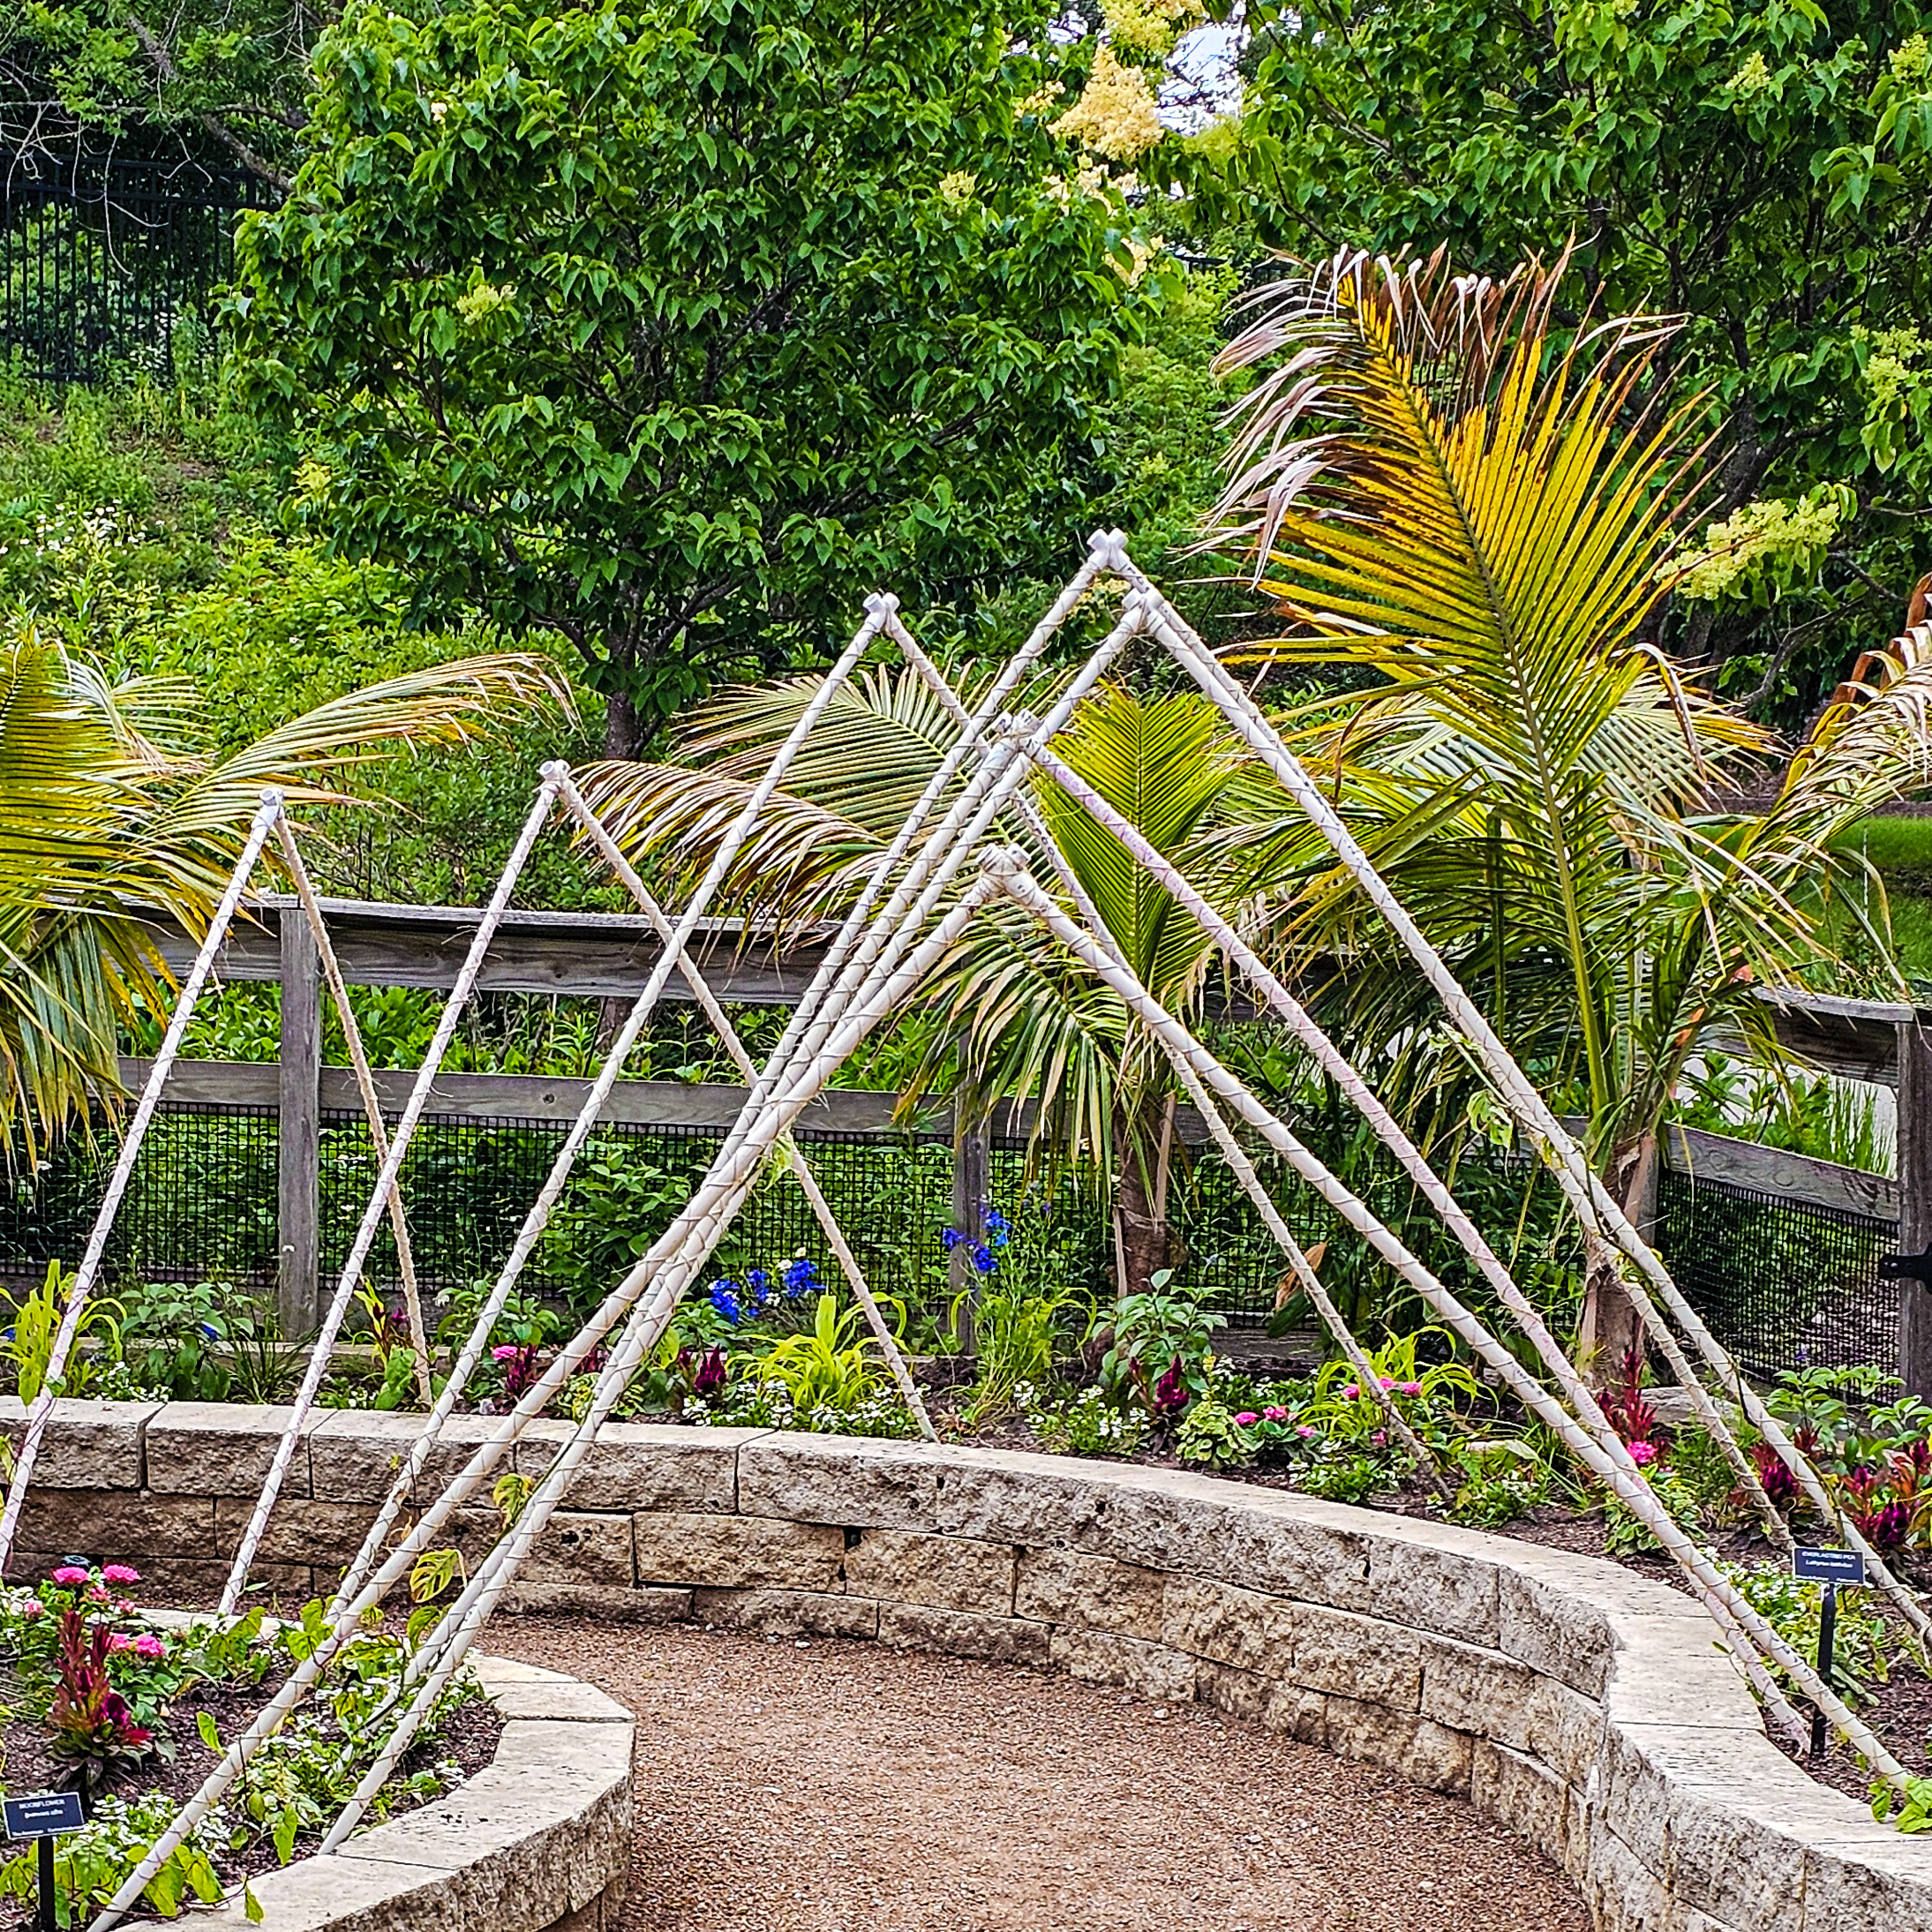 Arched poles form a structure in a tropical garden